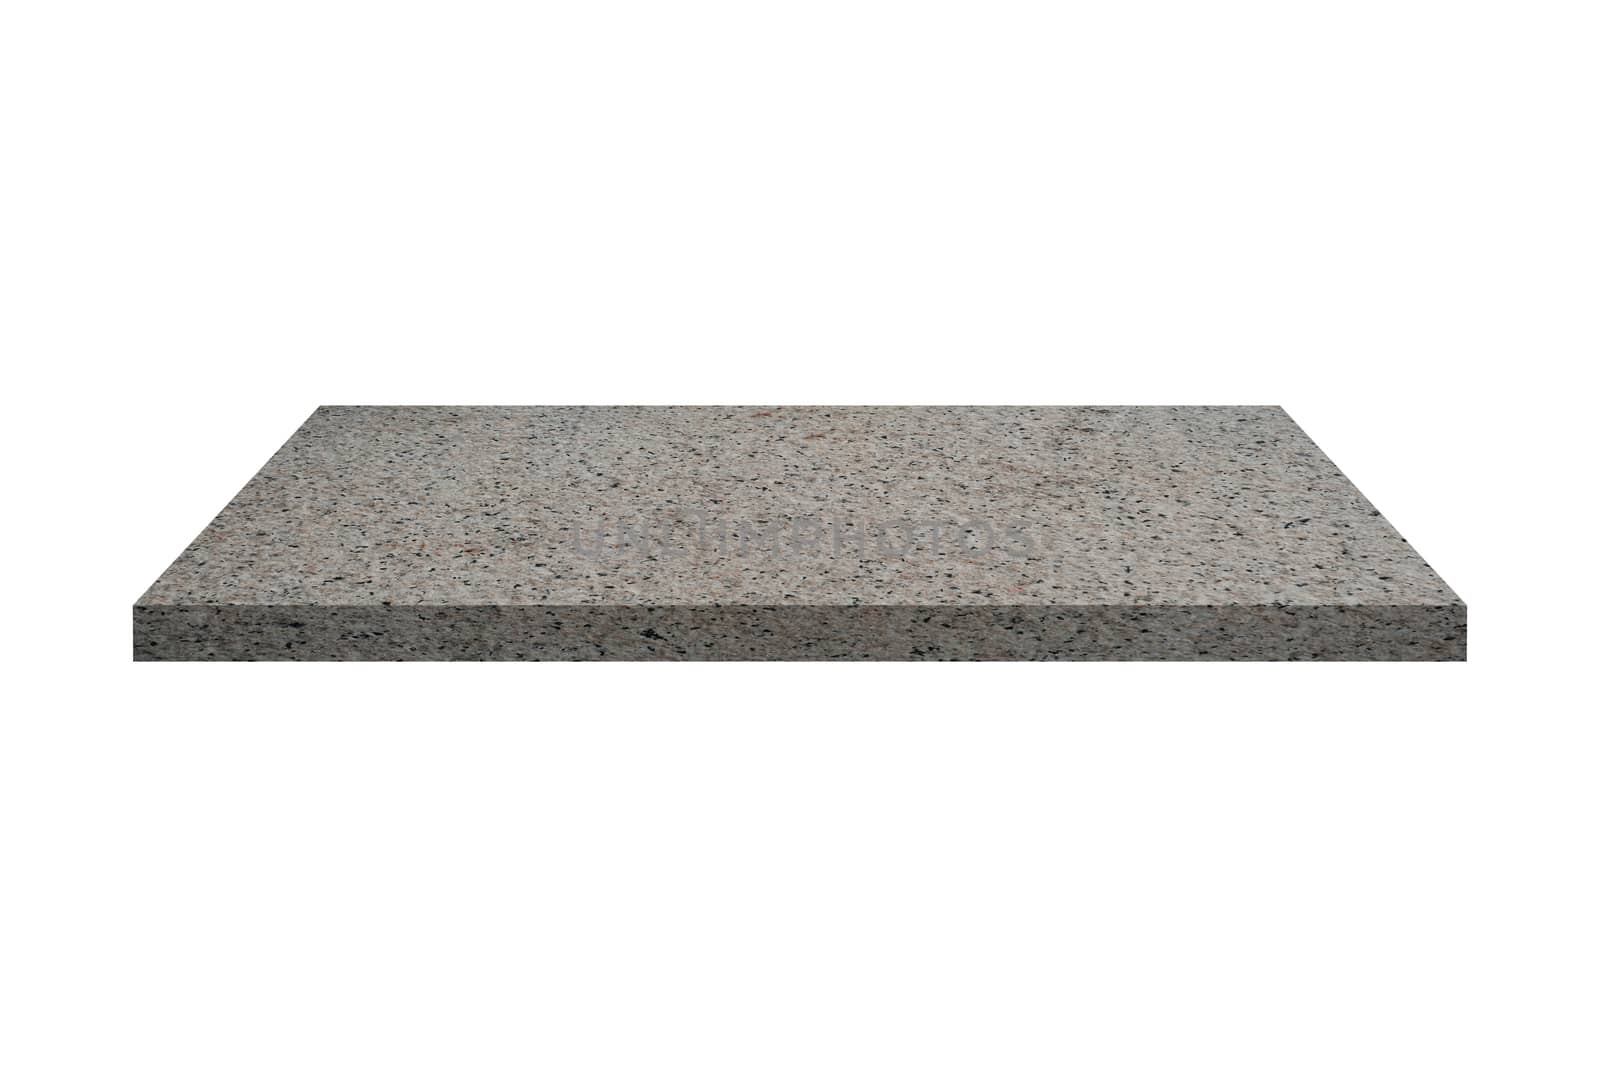 Granite shelf isolated on white background with clipping path.